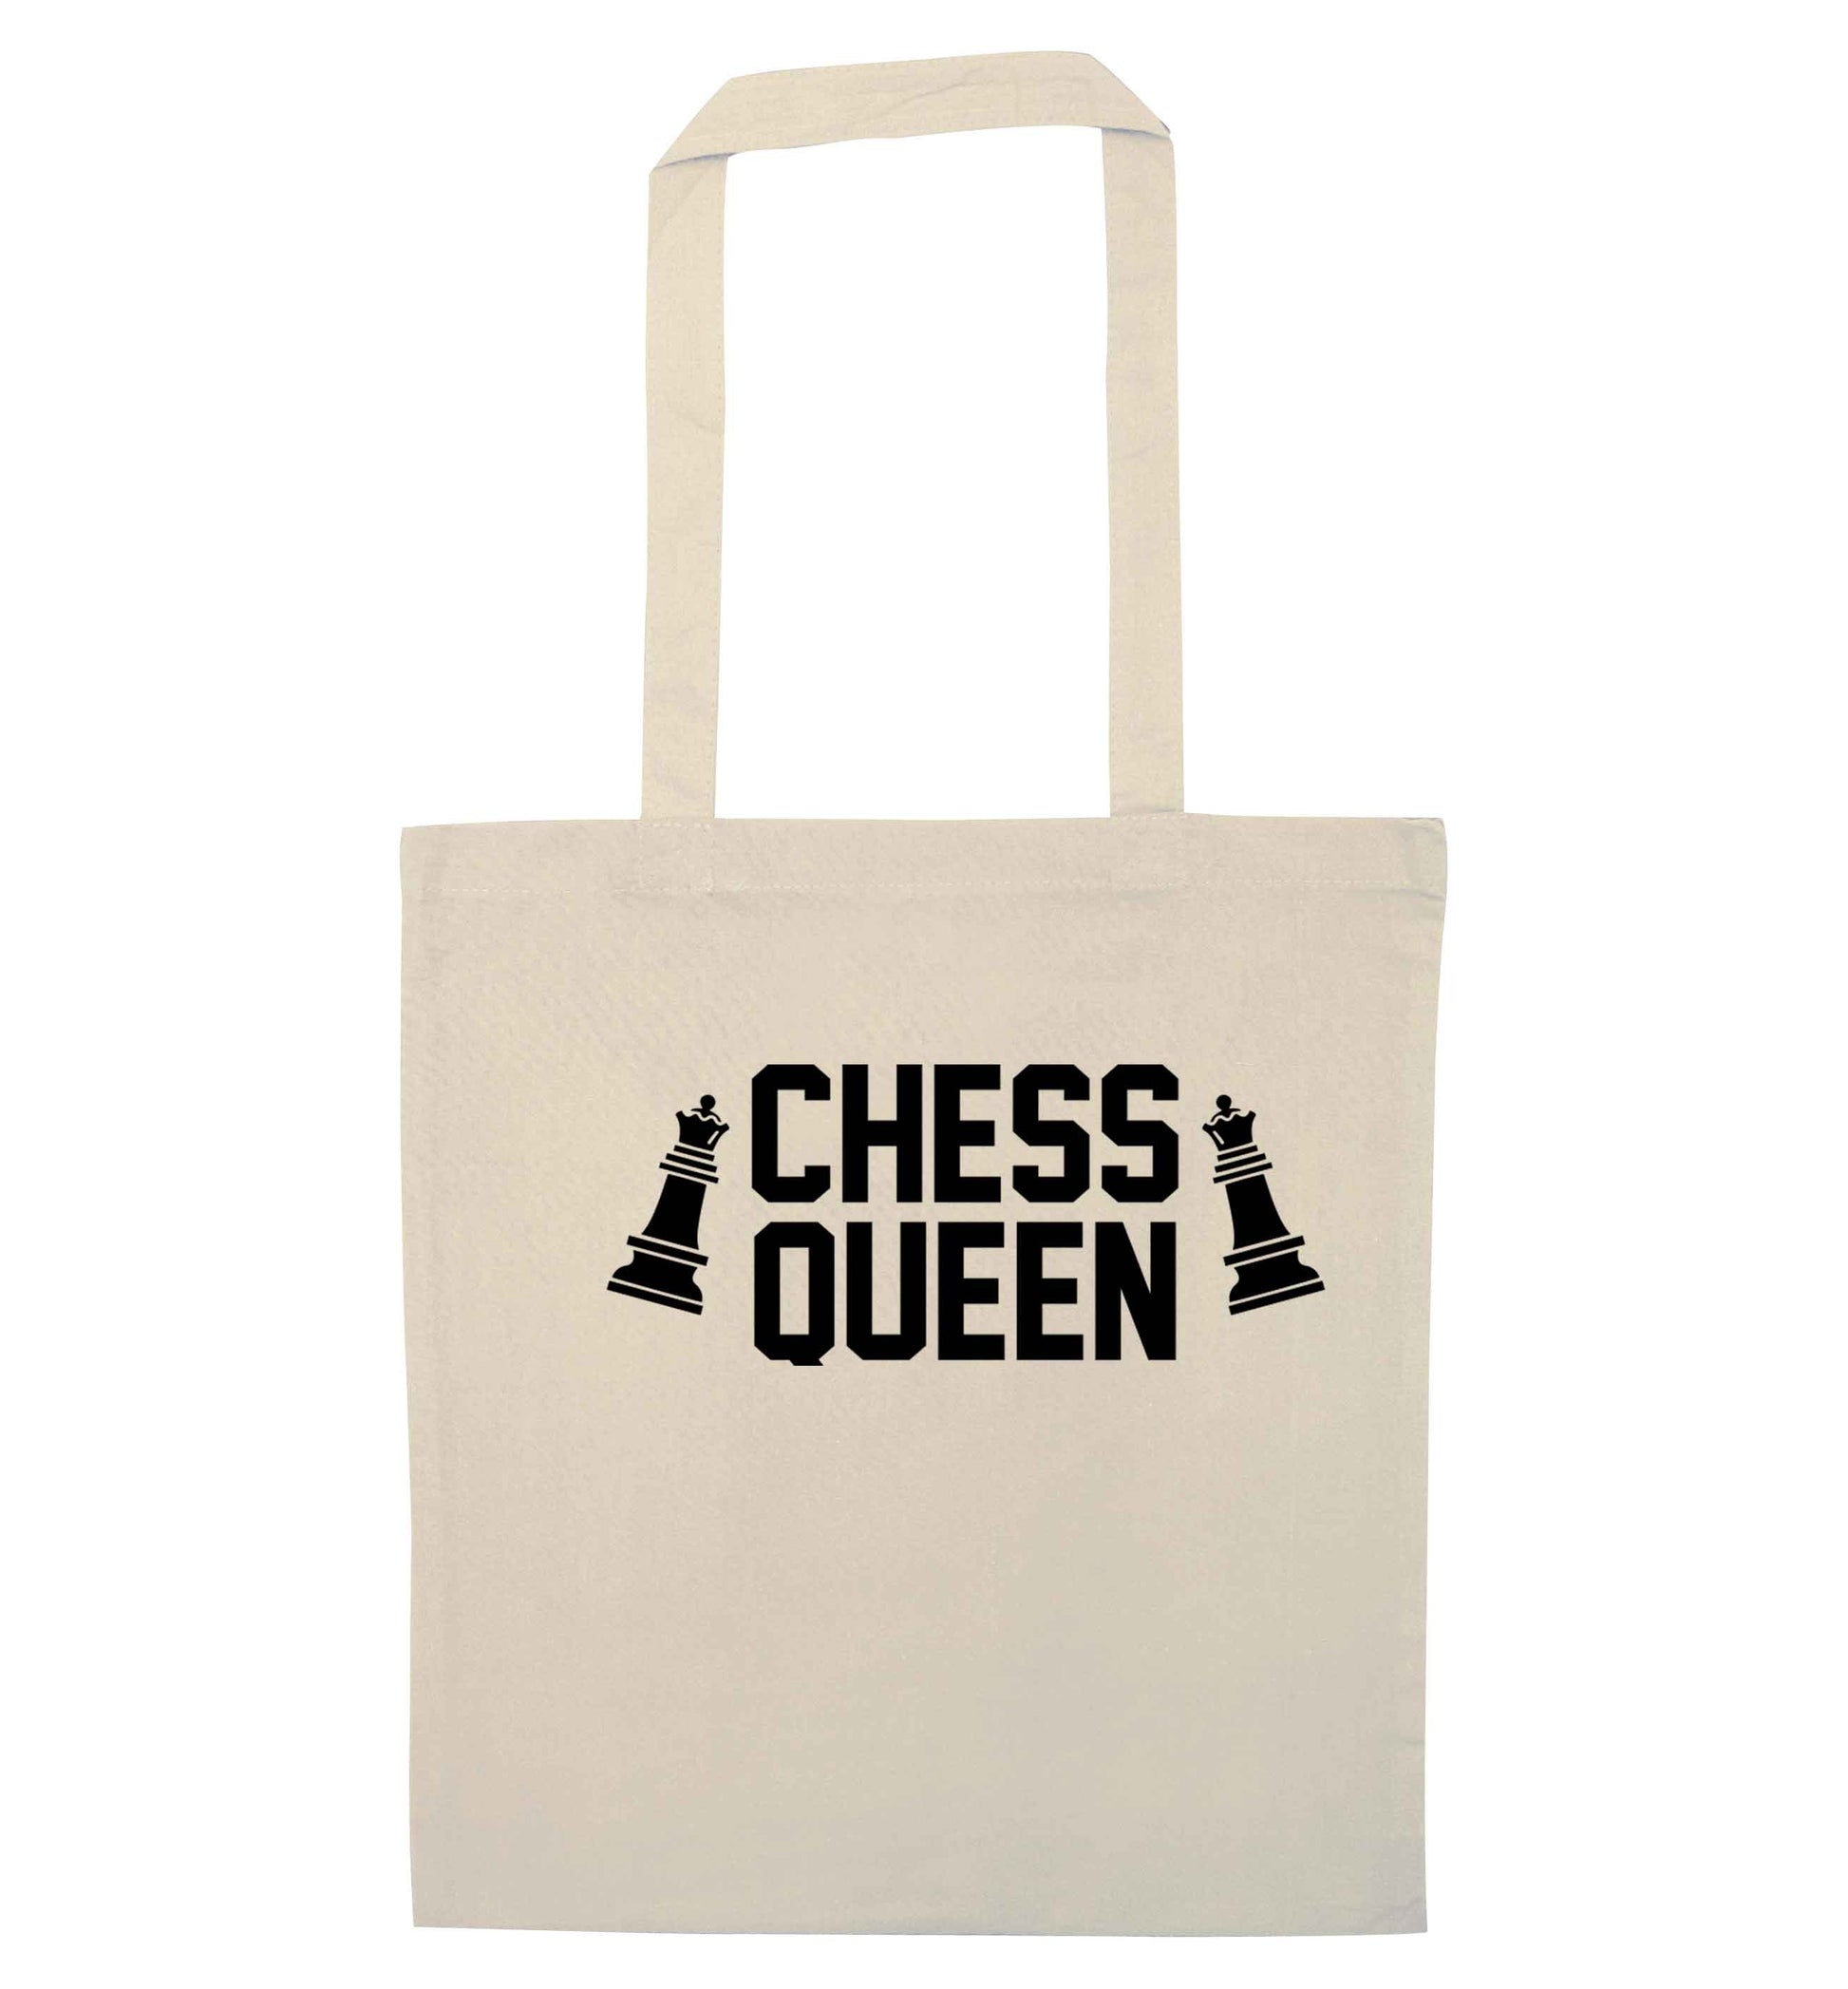 Chess queen natural tote bag